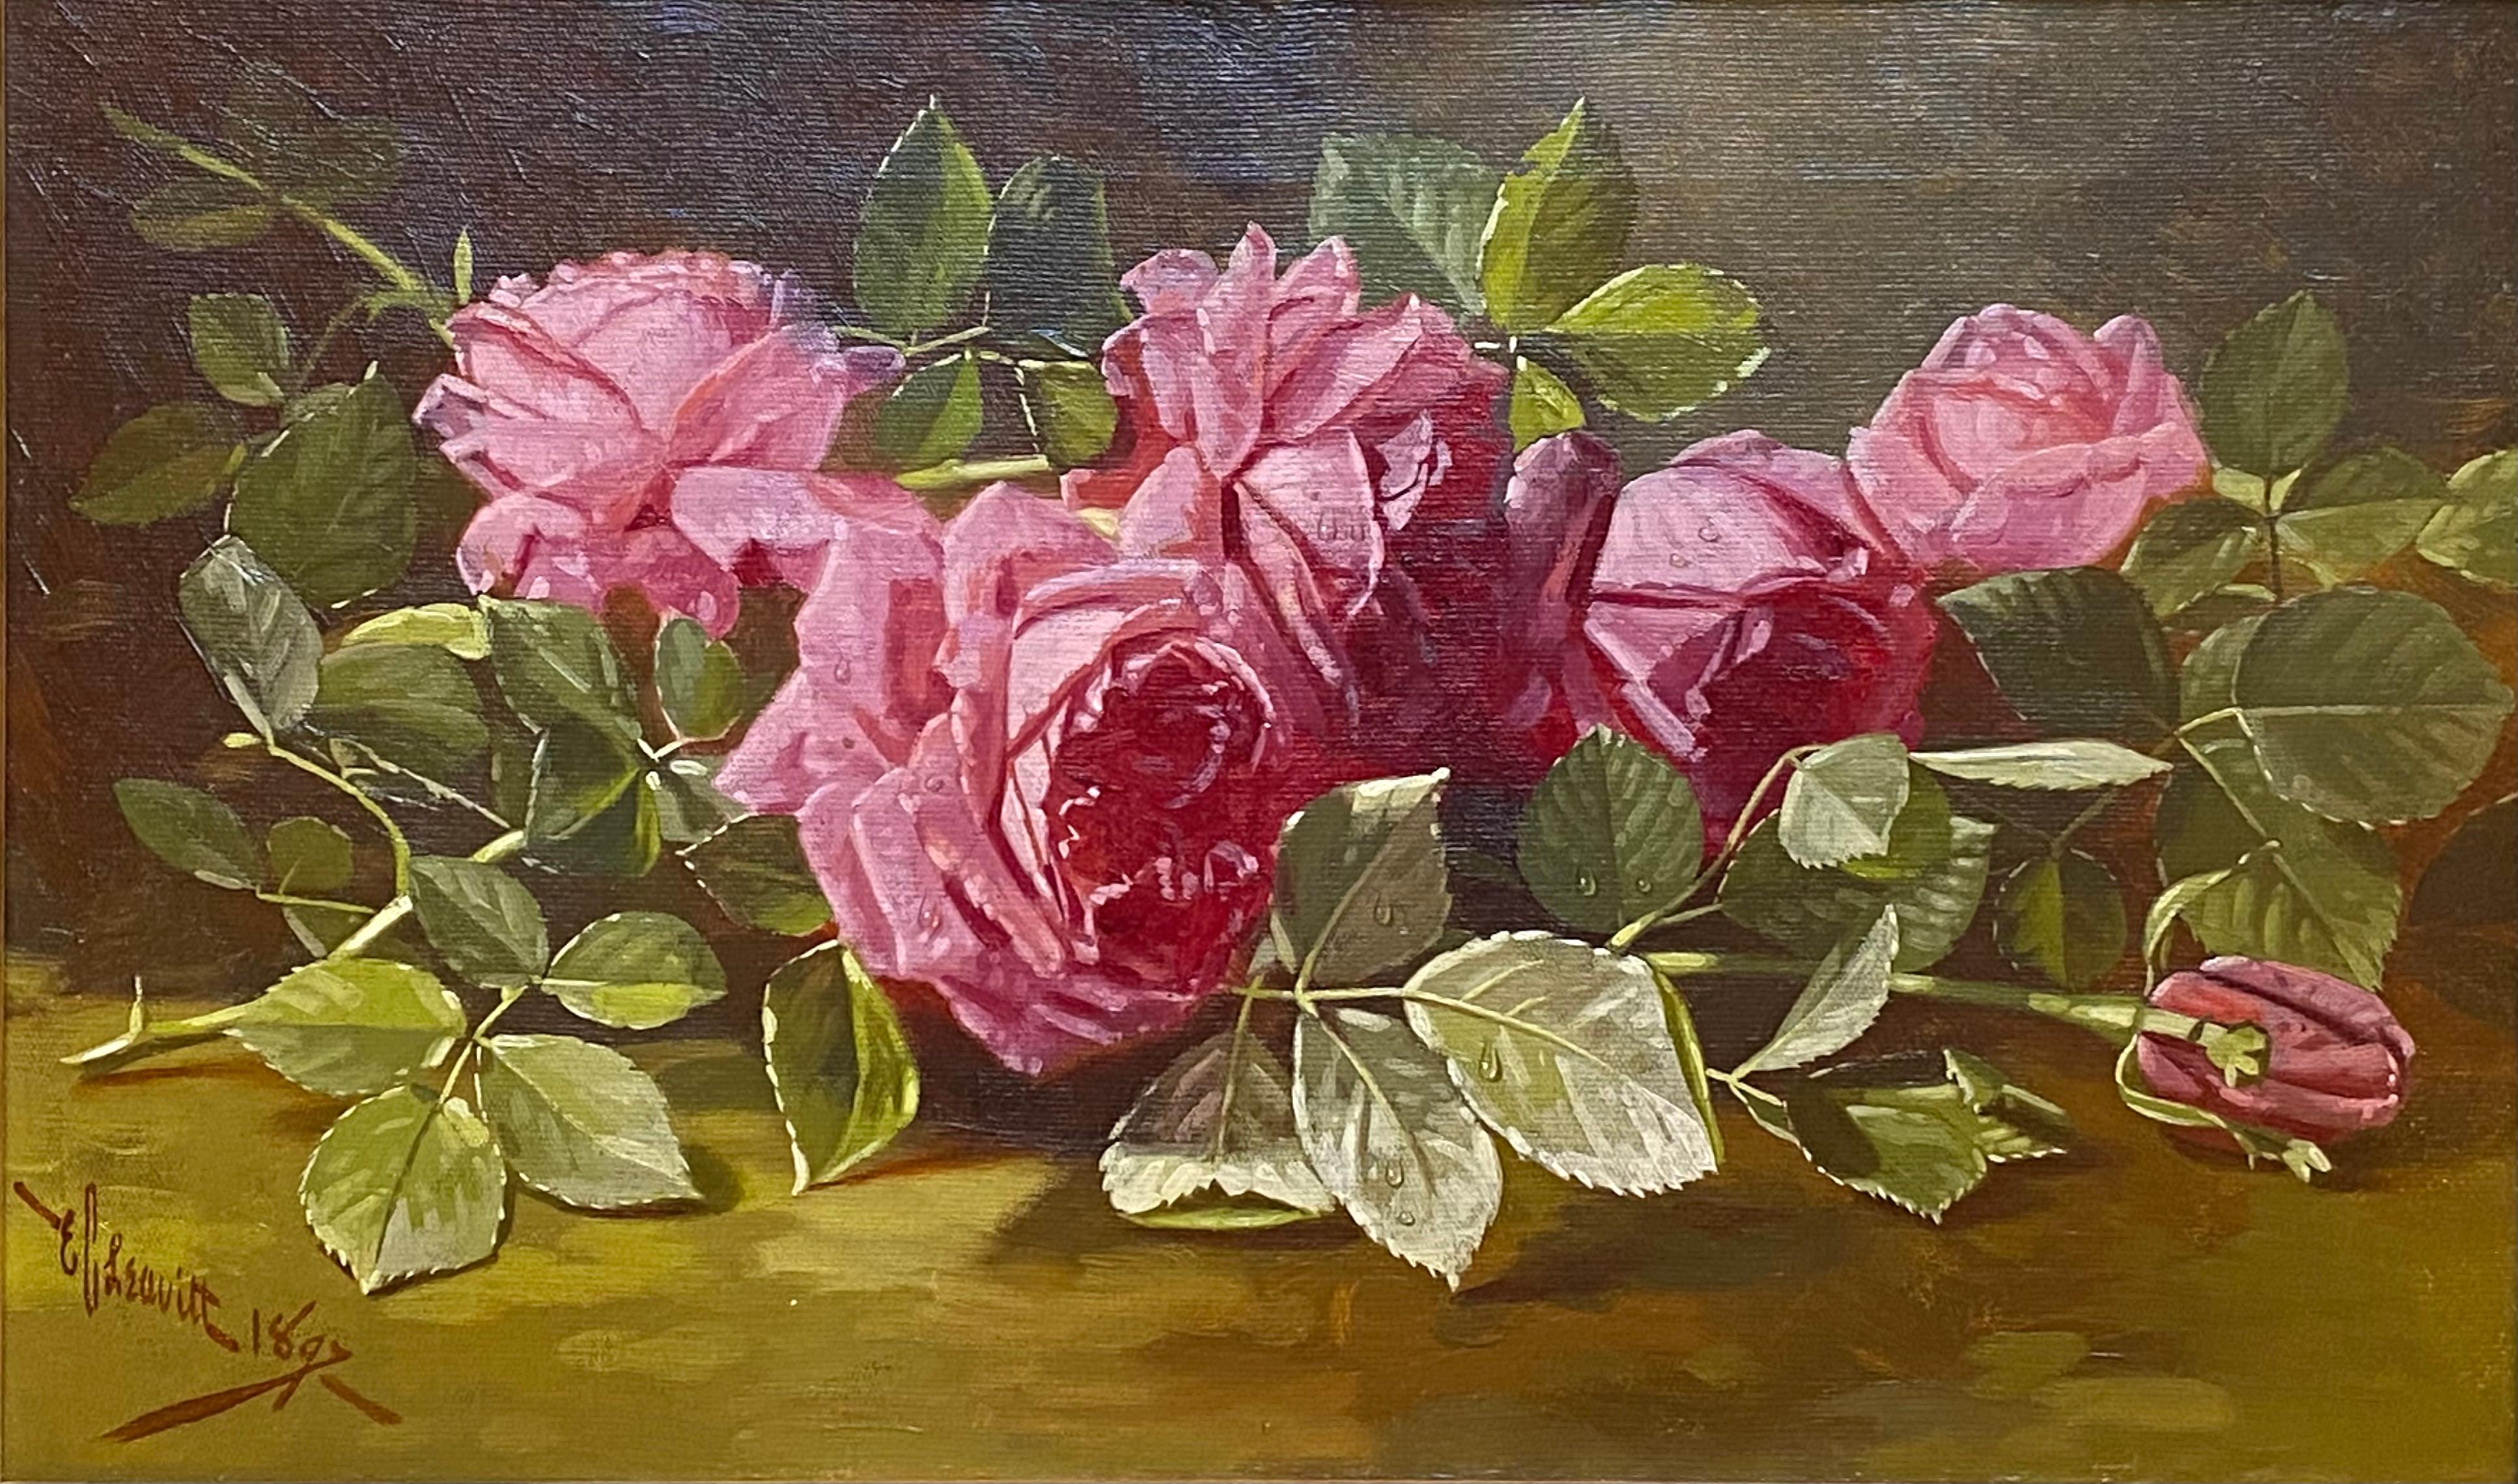 “Red Roses” - Academic Painting by Edward Chalmers Leavitt